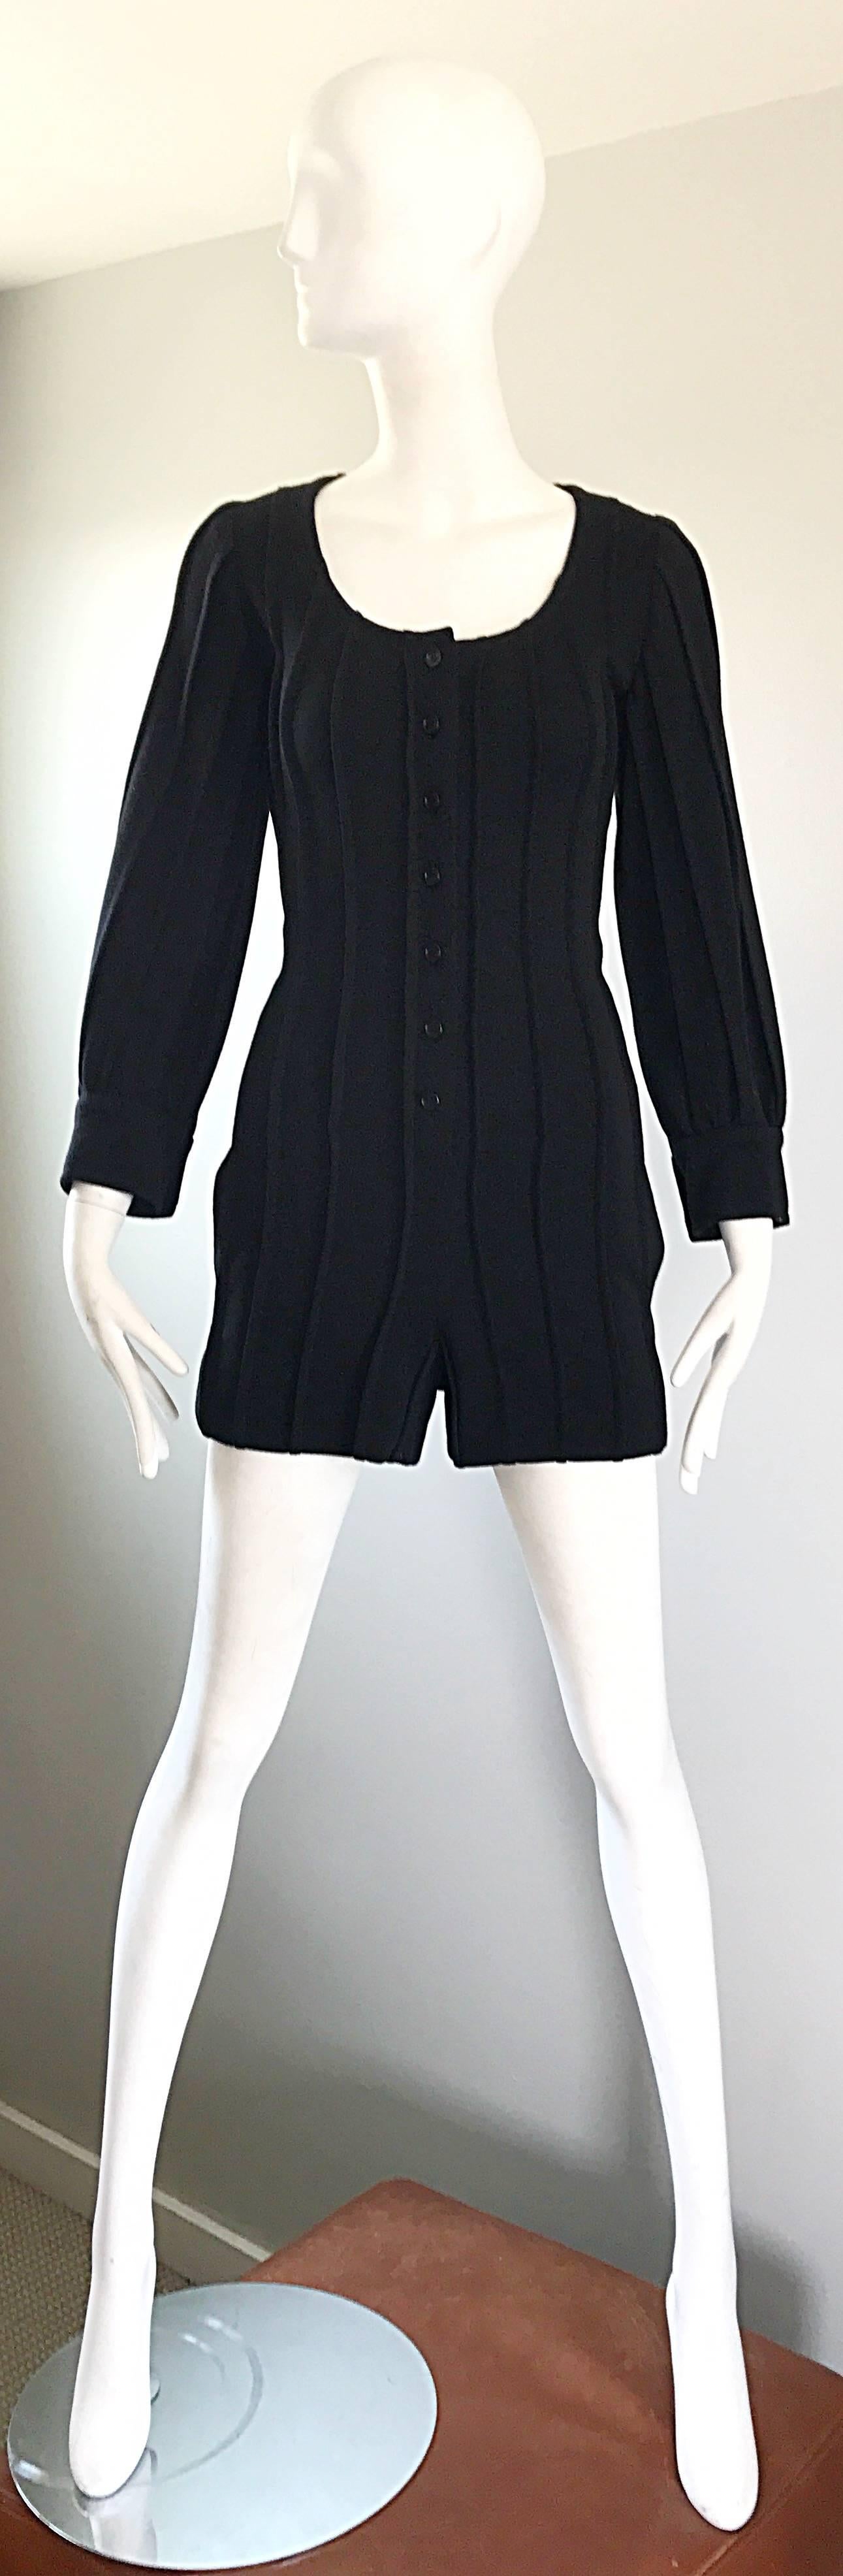 Incredible 1990s GIVENCHY HAUTE COUTURE by ALEXANDER MCQUEEN black ribbed wool romper onesie! Soft virgin wool features vertical ribs throughout. Buttons up the bodice, and at each sleeve cuff. Pocket at each side hip. Amazing quality, with an